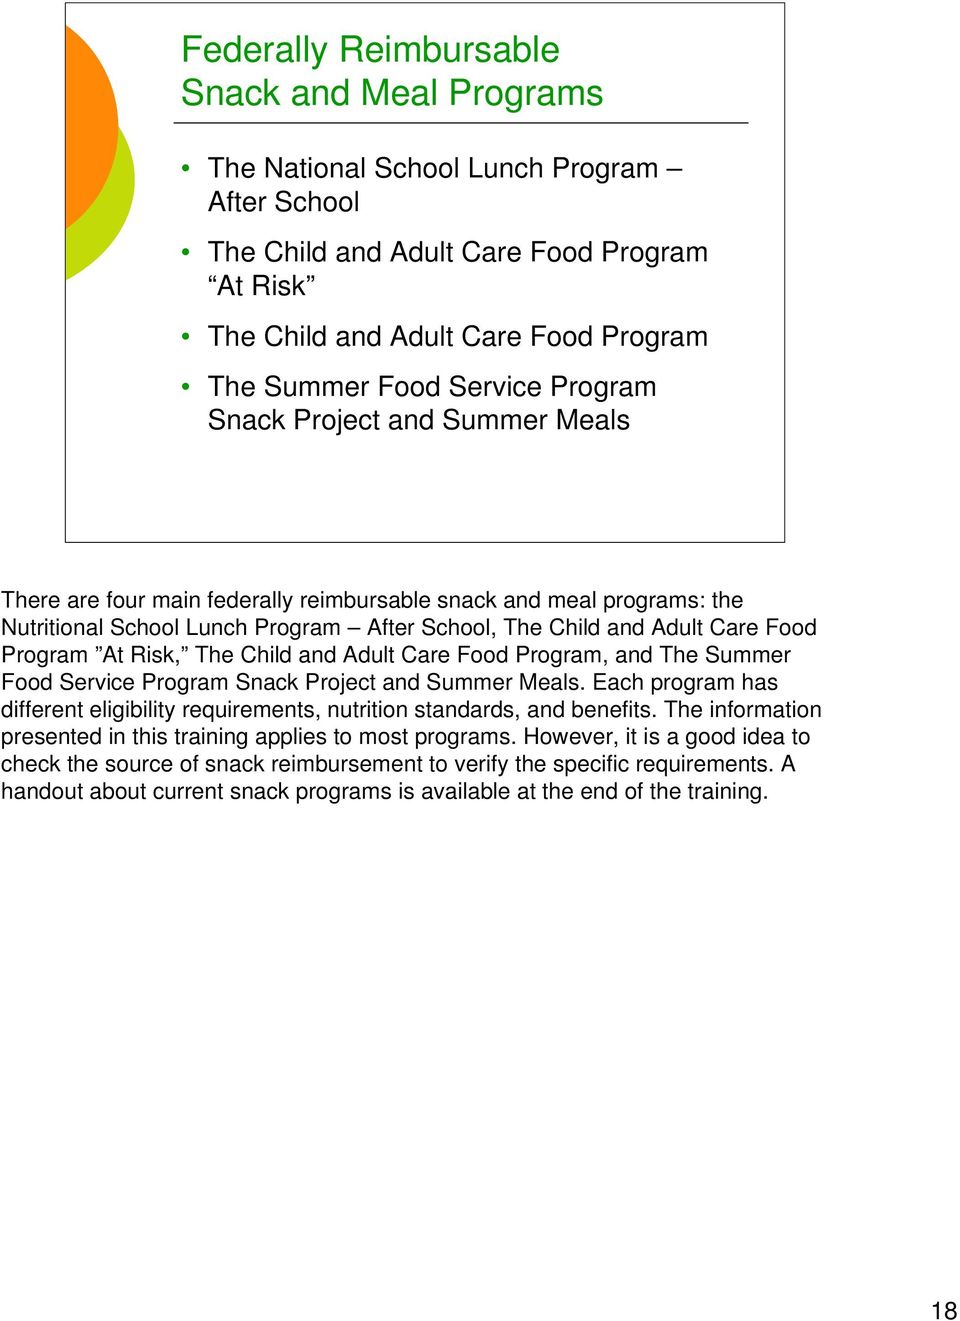 Program At Risk, The Child and Adult Care Food Program, and The Summer Food Service Program Snack Project and Summer Meals.